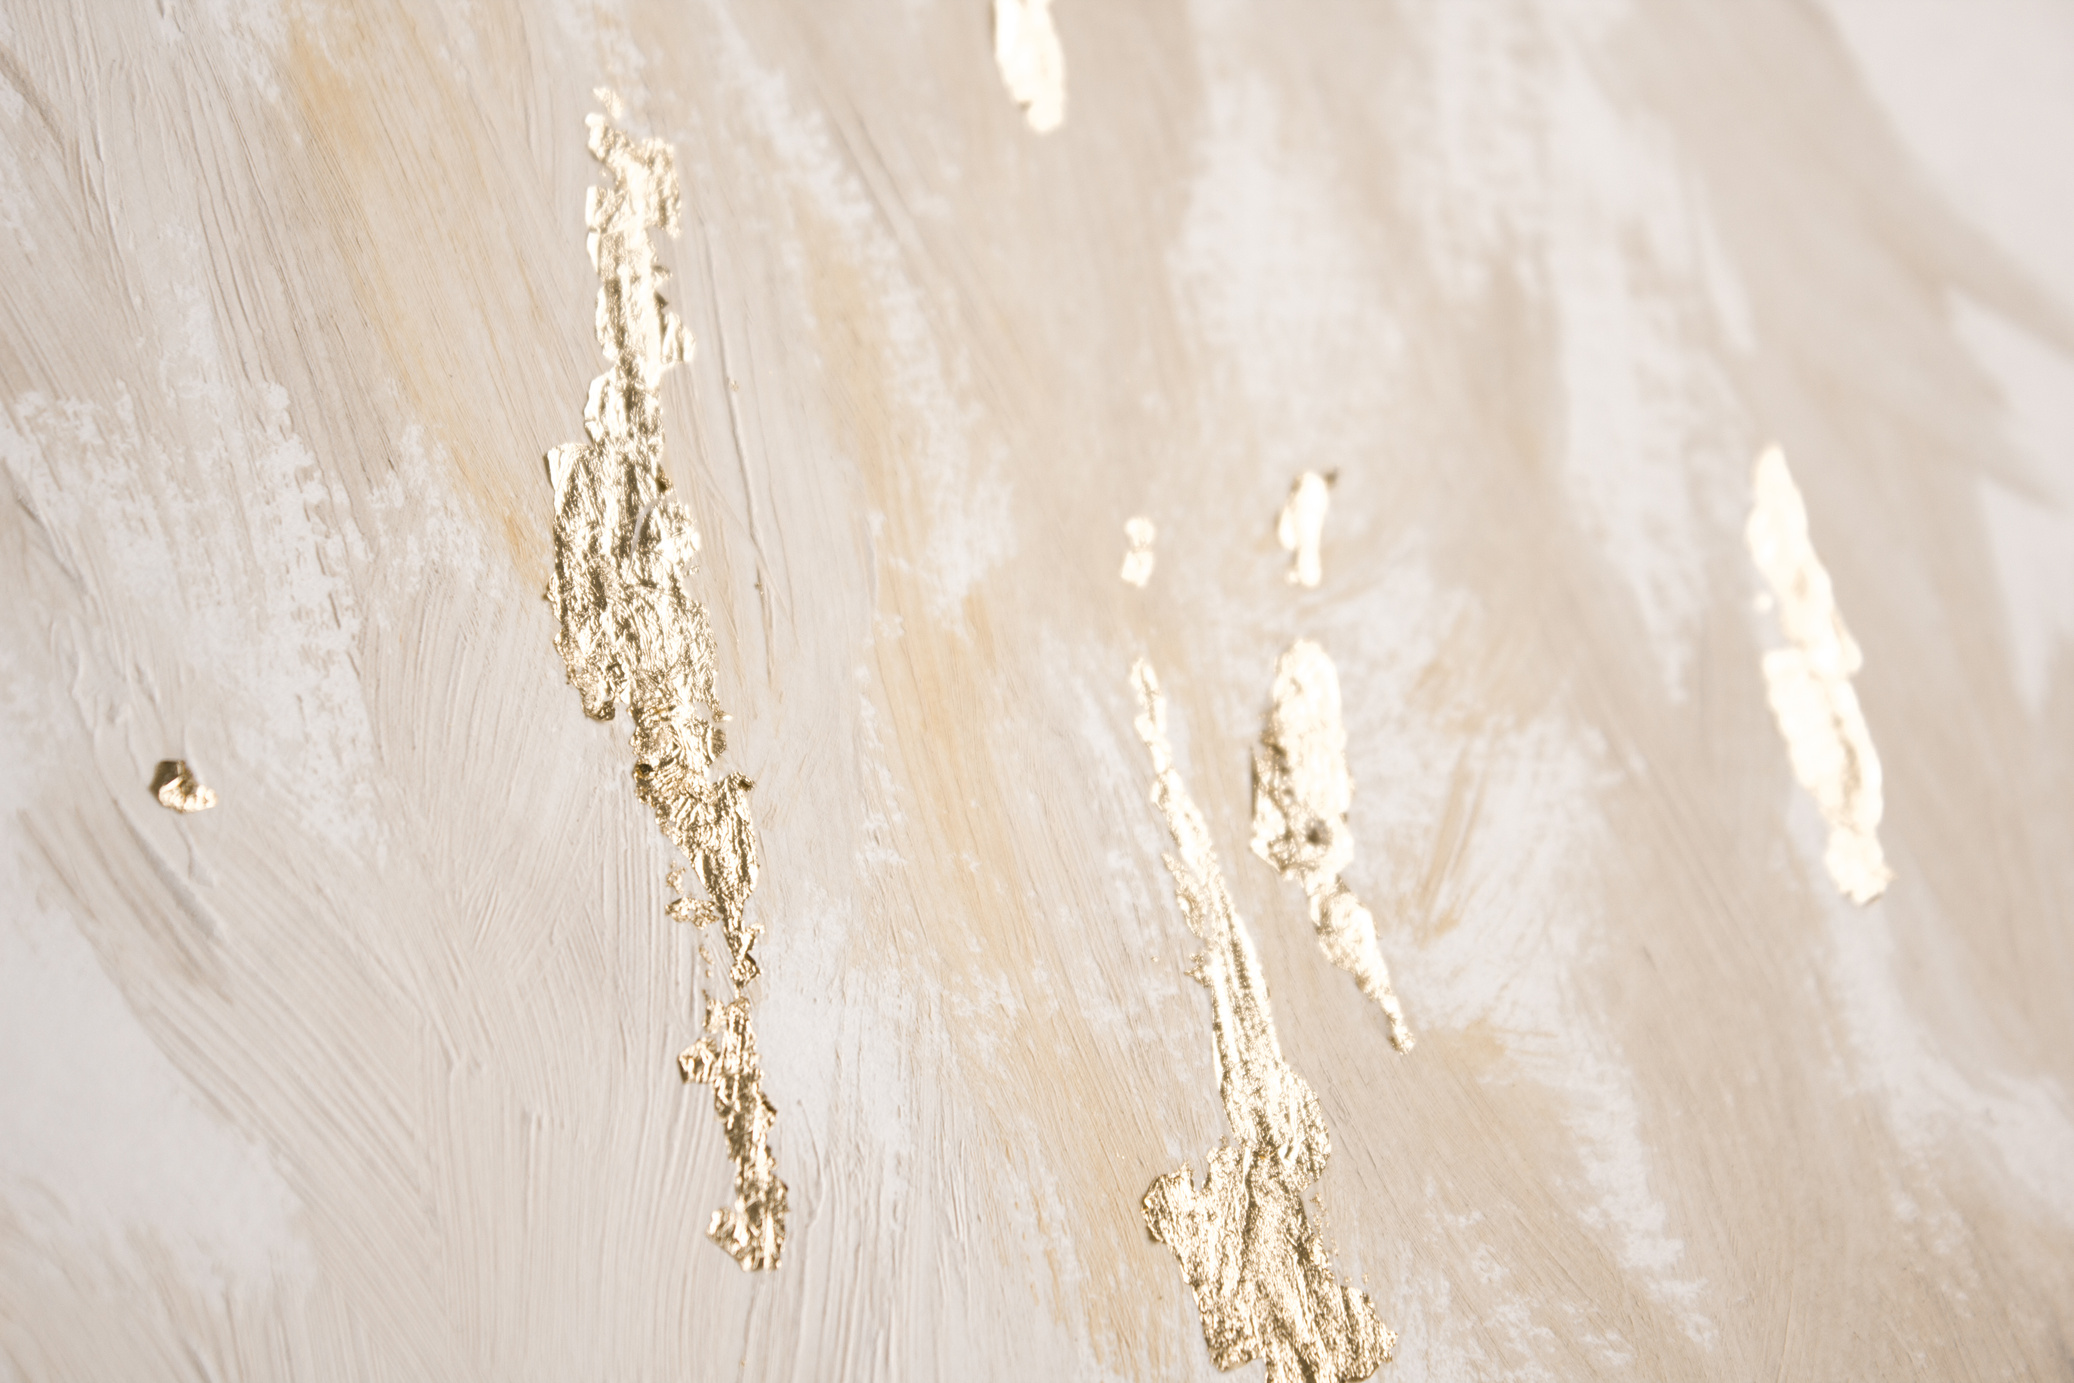 Wall with Brushstrokes and Gold Foils